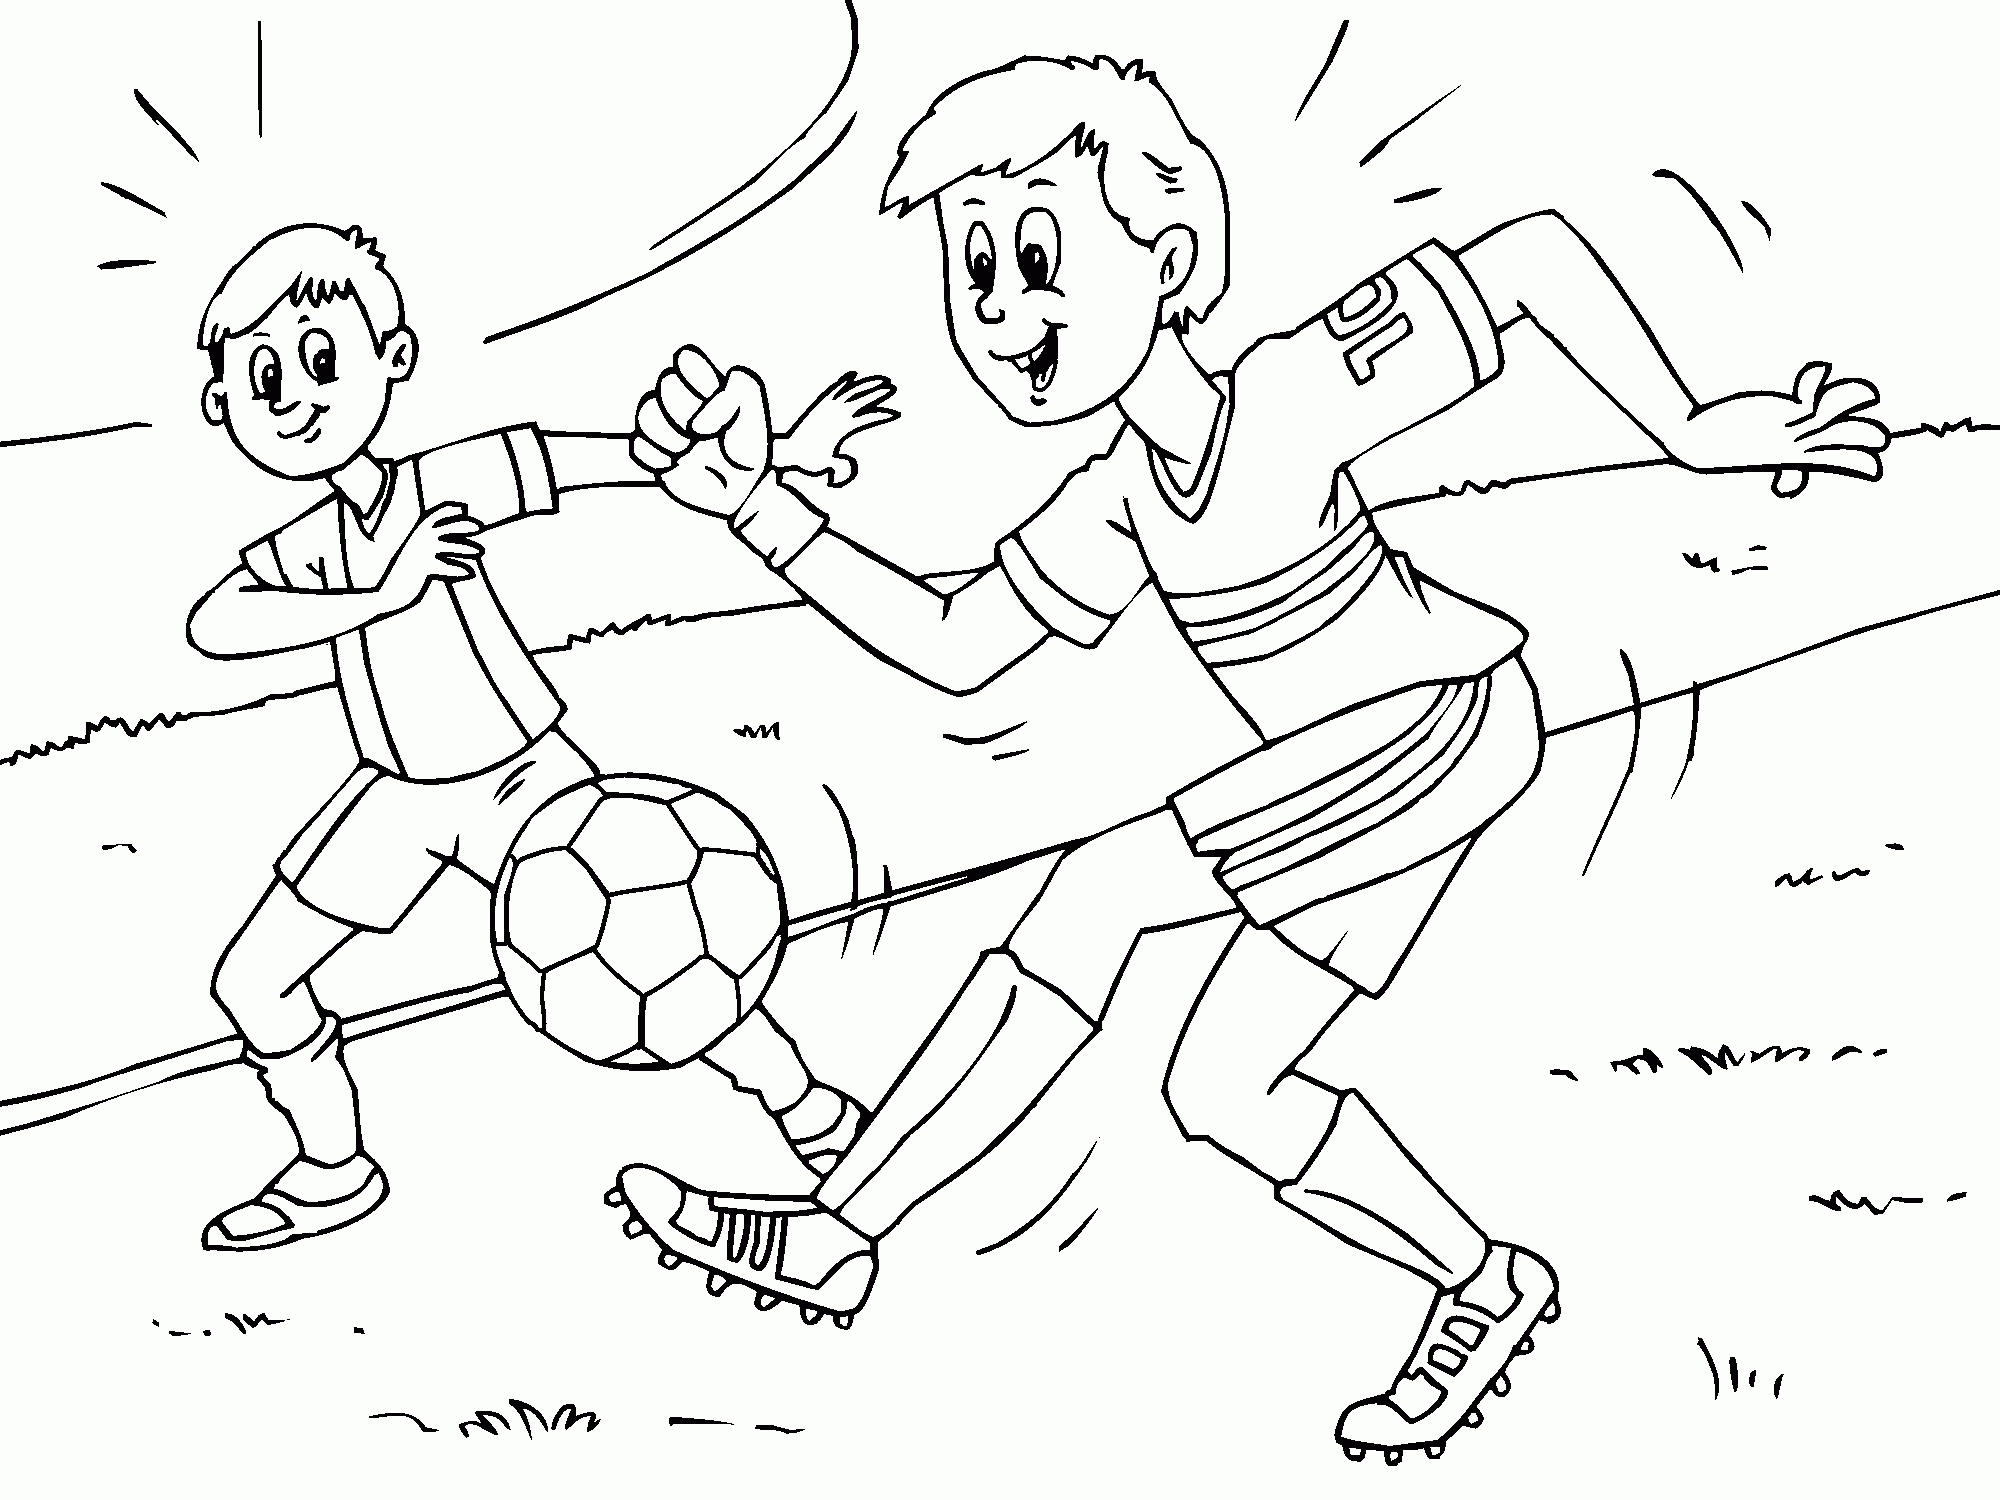 Children playing football in the summer